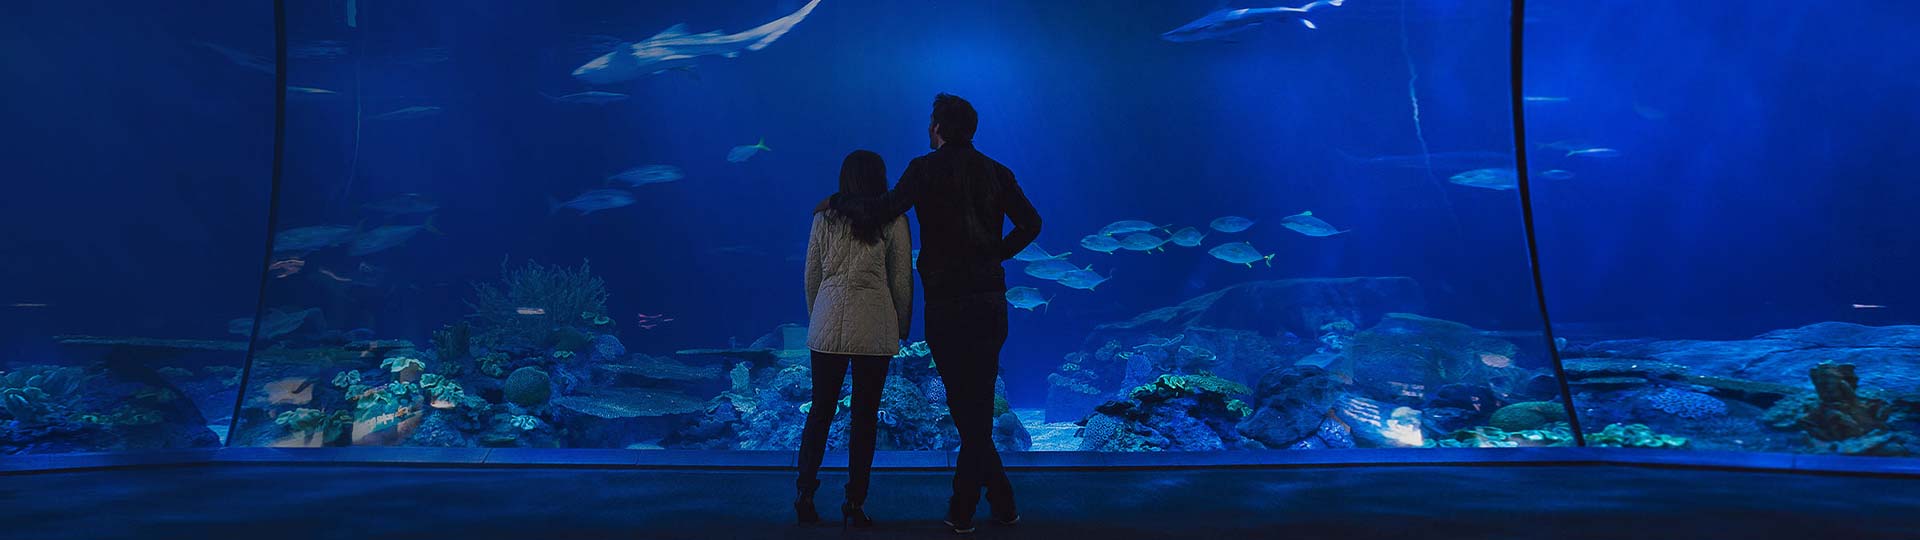 A person and person standing in front of a blue wall of fishes